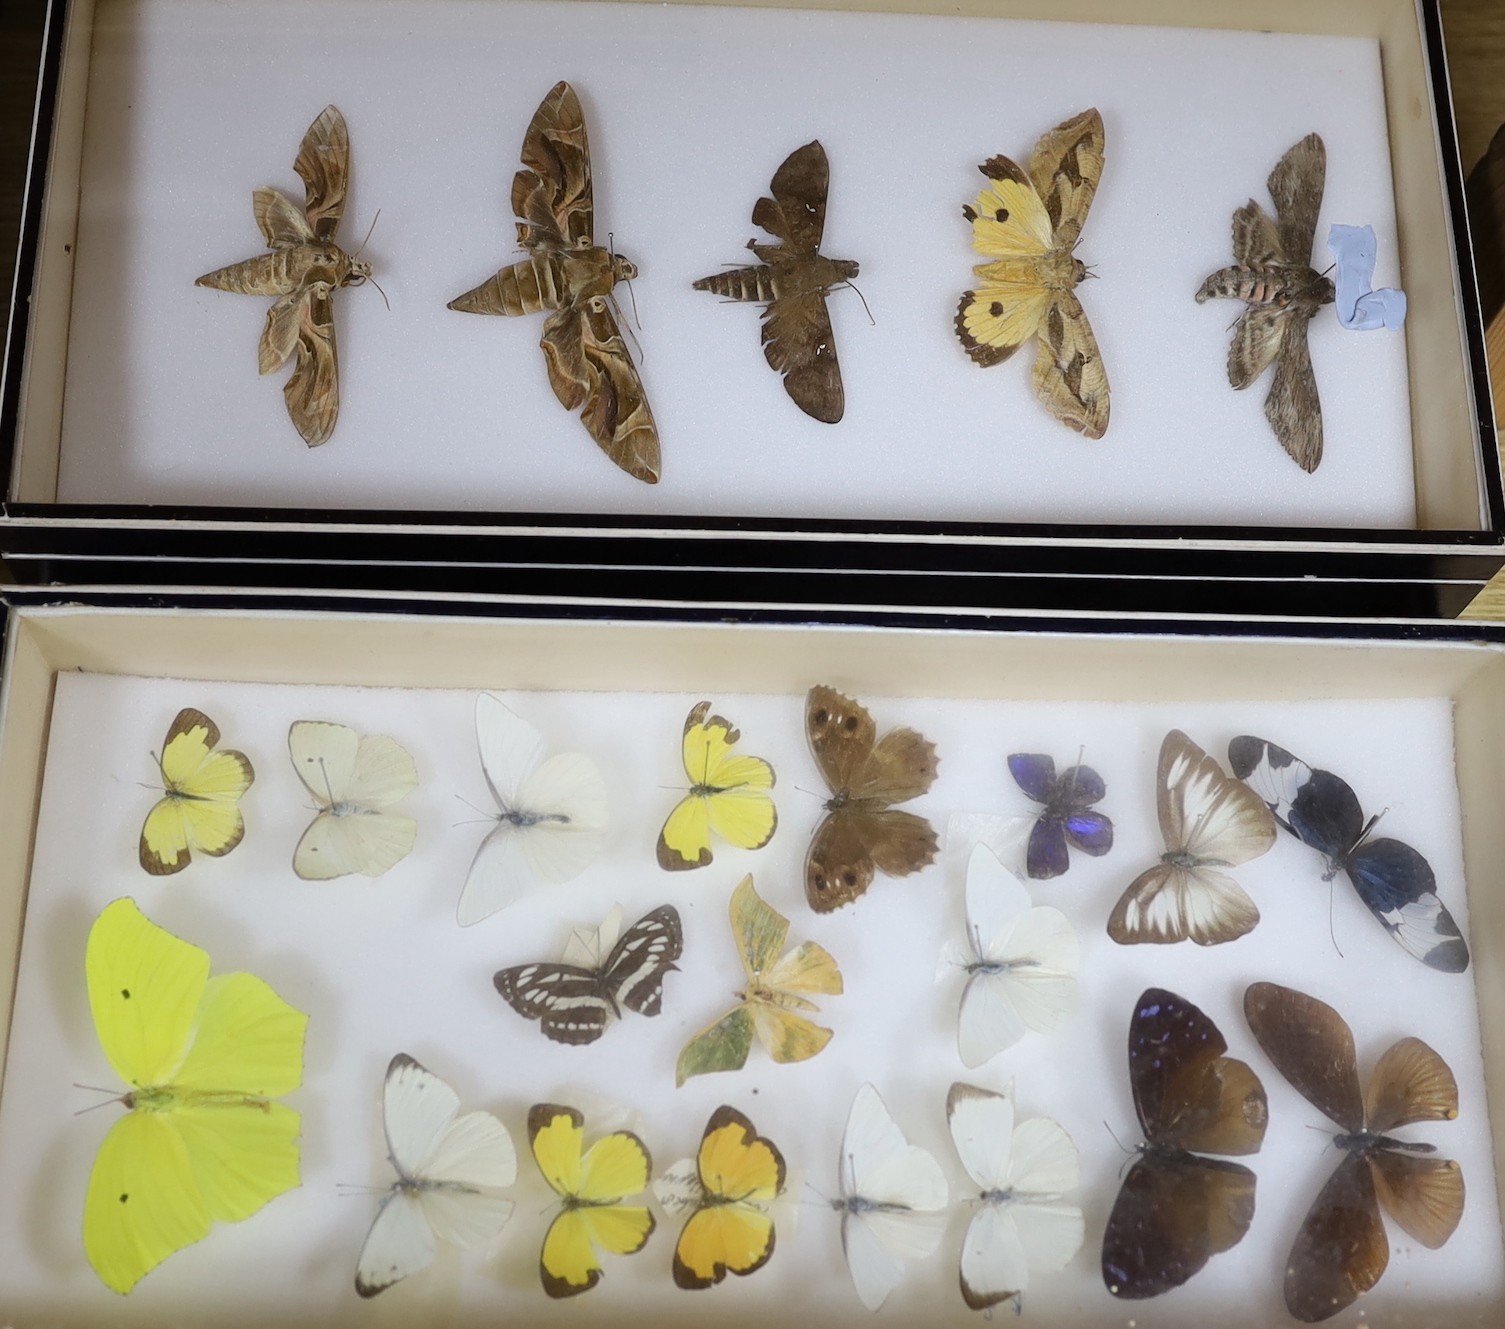 Entomology - Butterfly and moth specimens in 15 display boxes, largest box 37 cm wide